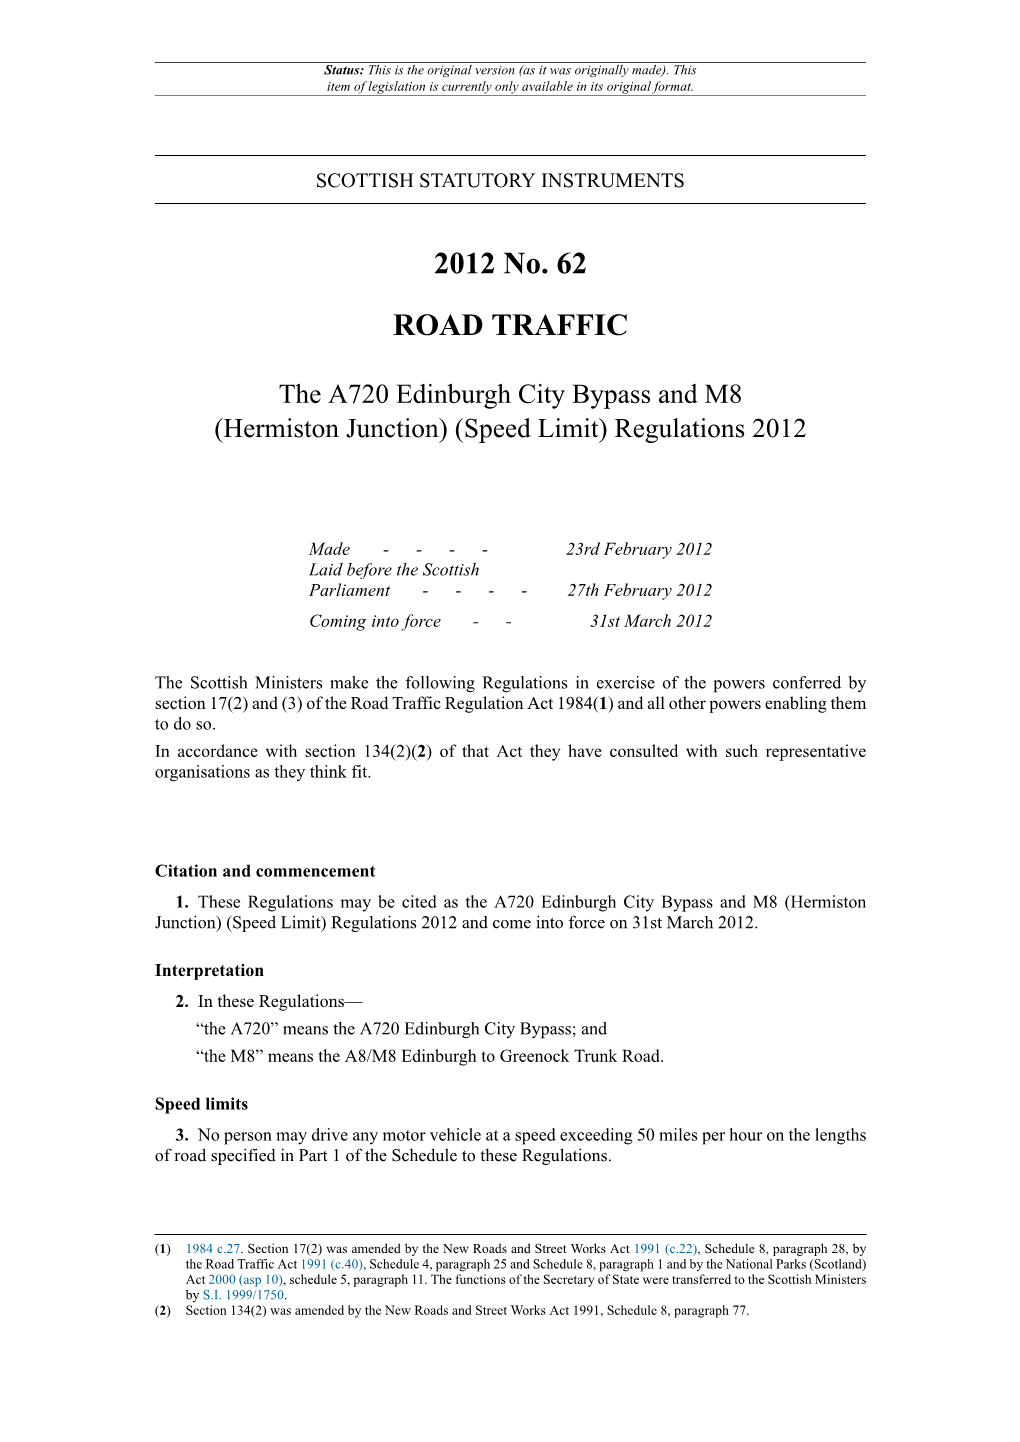 The A720 Edinburgh City Bypass and M8 (Hermiston Junction) (Speed Limit) Regulations 2012